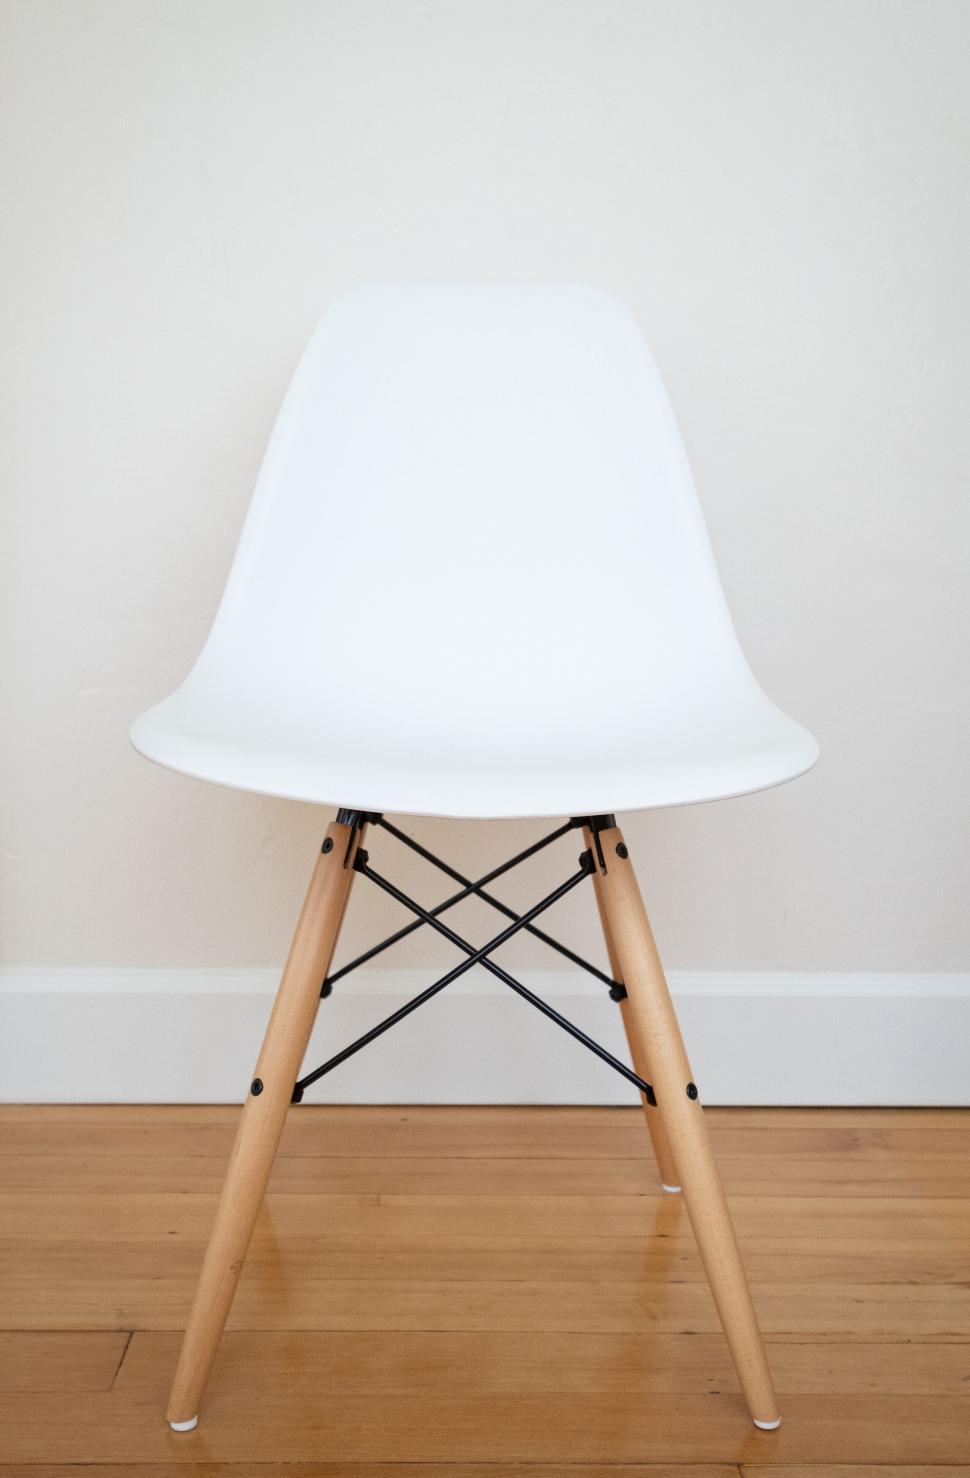 Free Image of Modern white chair against beige wall 